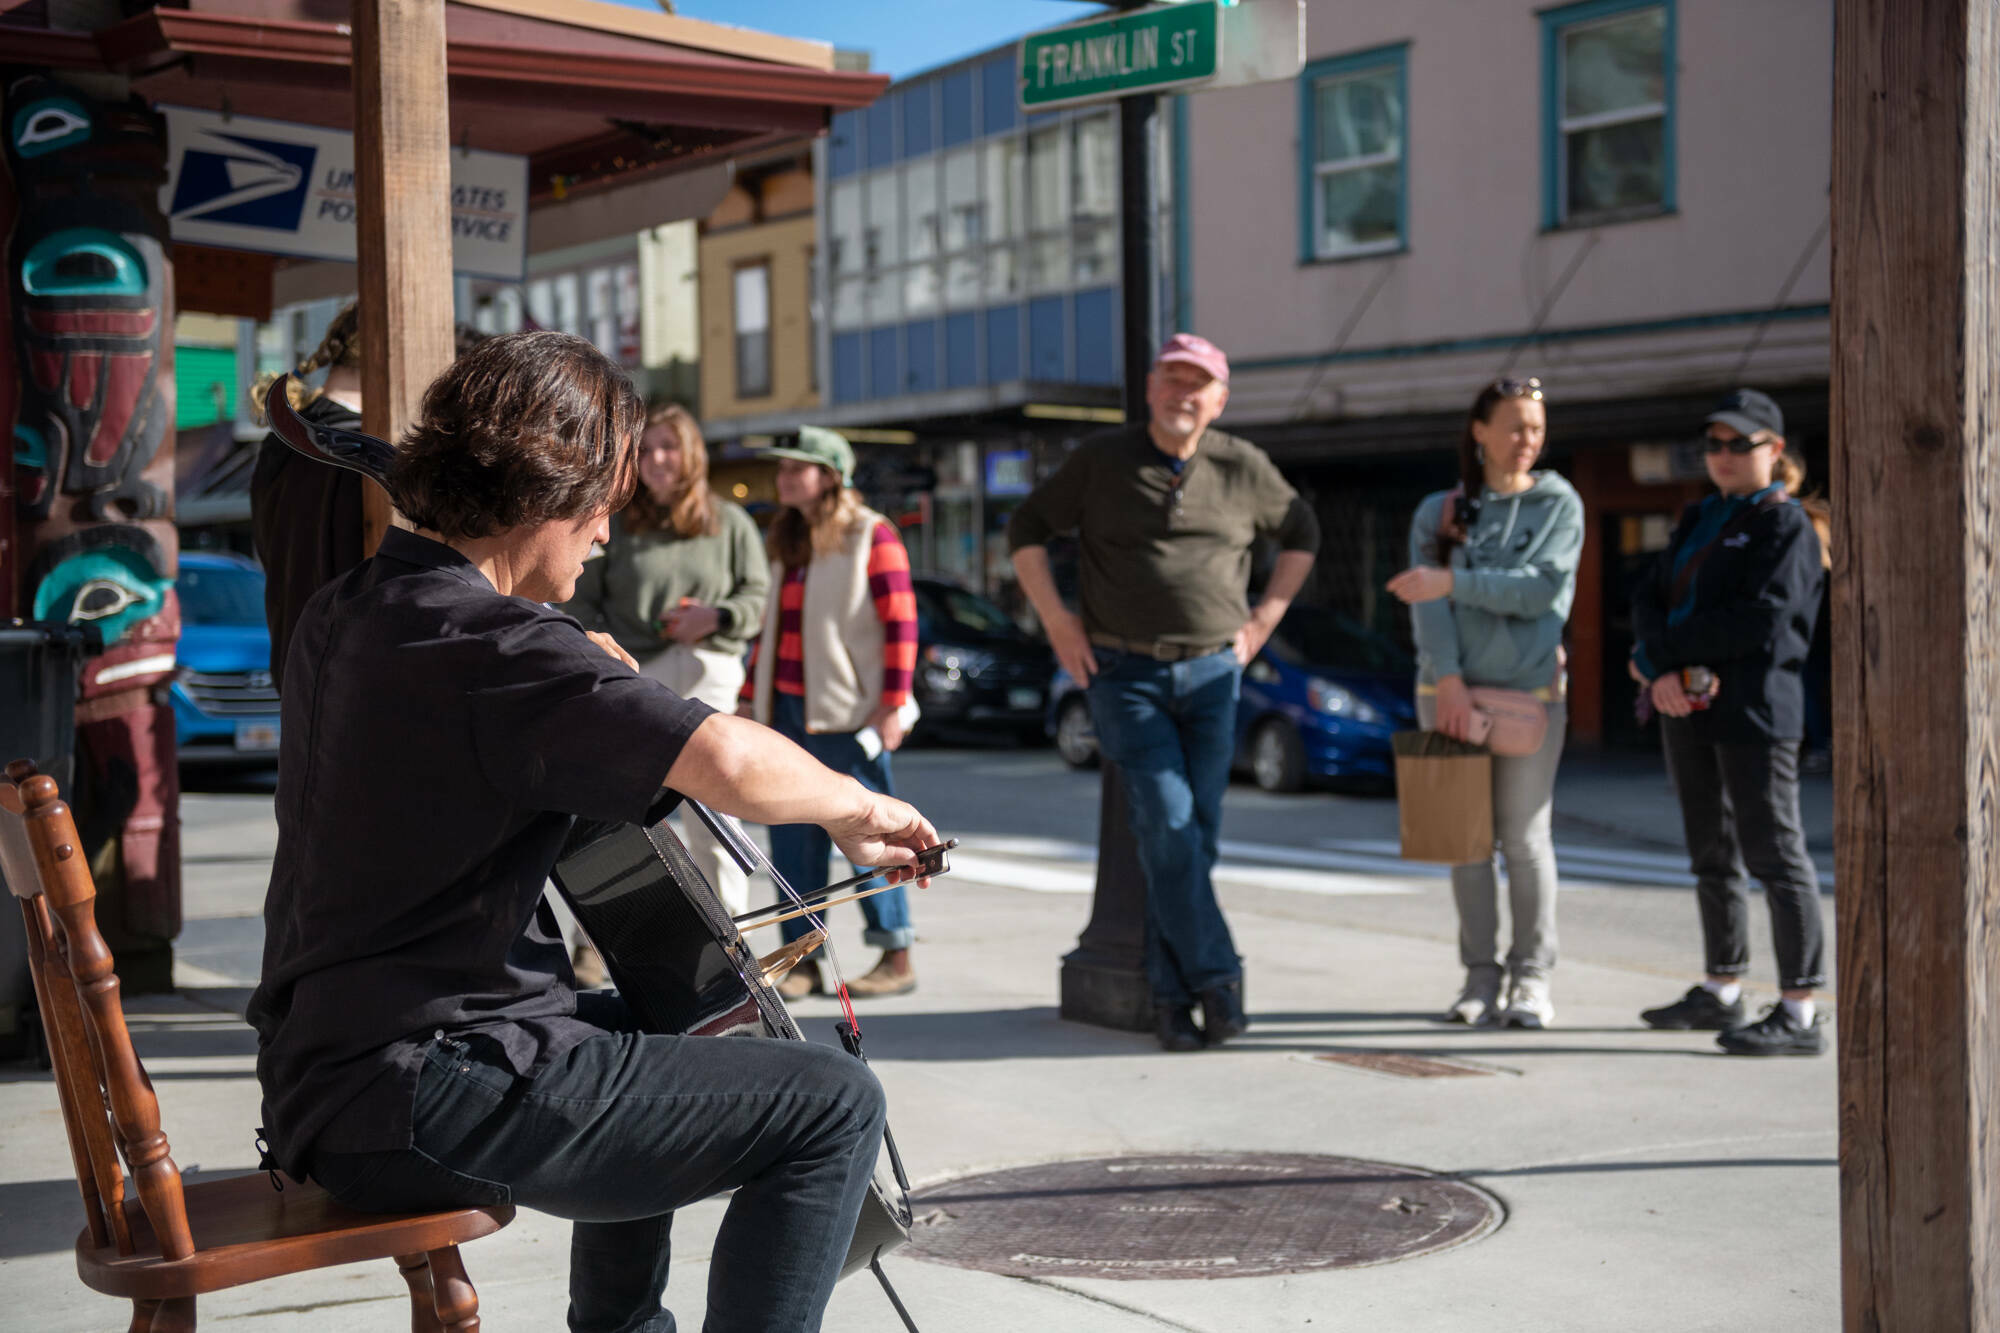 Zuill Bailey, music director of Juneau Jazz and Classics, performs a pop-up cello concert near the food carts at the intersection of Franklin and Front streets during the spring 2022 festival. (Photo courtesy of Juneau Jazz and Classics)